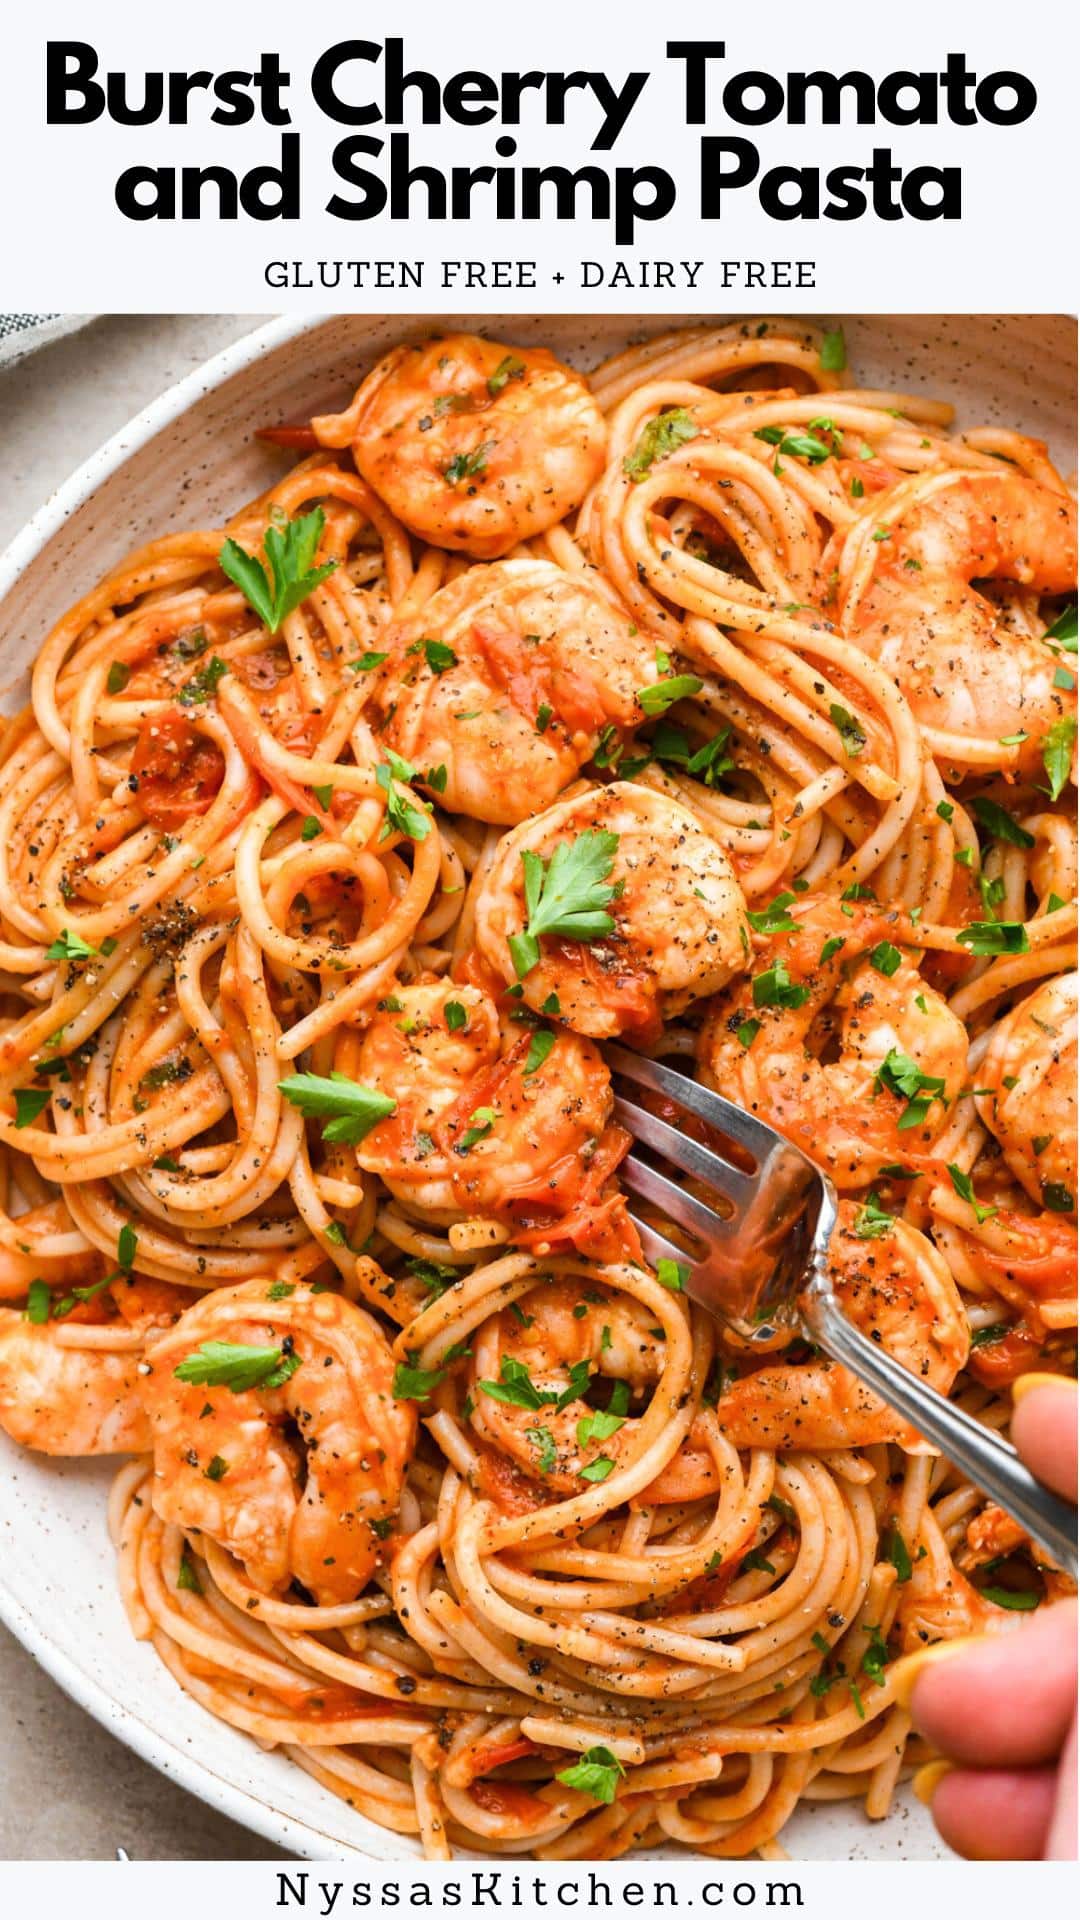 This simple burst cherry tomato and shrimp pasta is so simple but so incredibly flavorful! Made with fresh cherry tomatoes, lots of garlic, and a little bit of tomato paste to bolster the tomato flavor, it is made without cream and dairy free. We opt for GF pasta to keep the recipe gluten free, but any pasta you like will work! It is all cooked in one skillet and ready in just 30 minutes. Adding chopped parsley brings some color and elegance to the dish, making it just as perfect for serving guests as it is for a quick weeknight dinner.